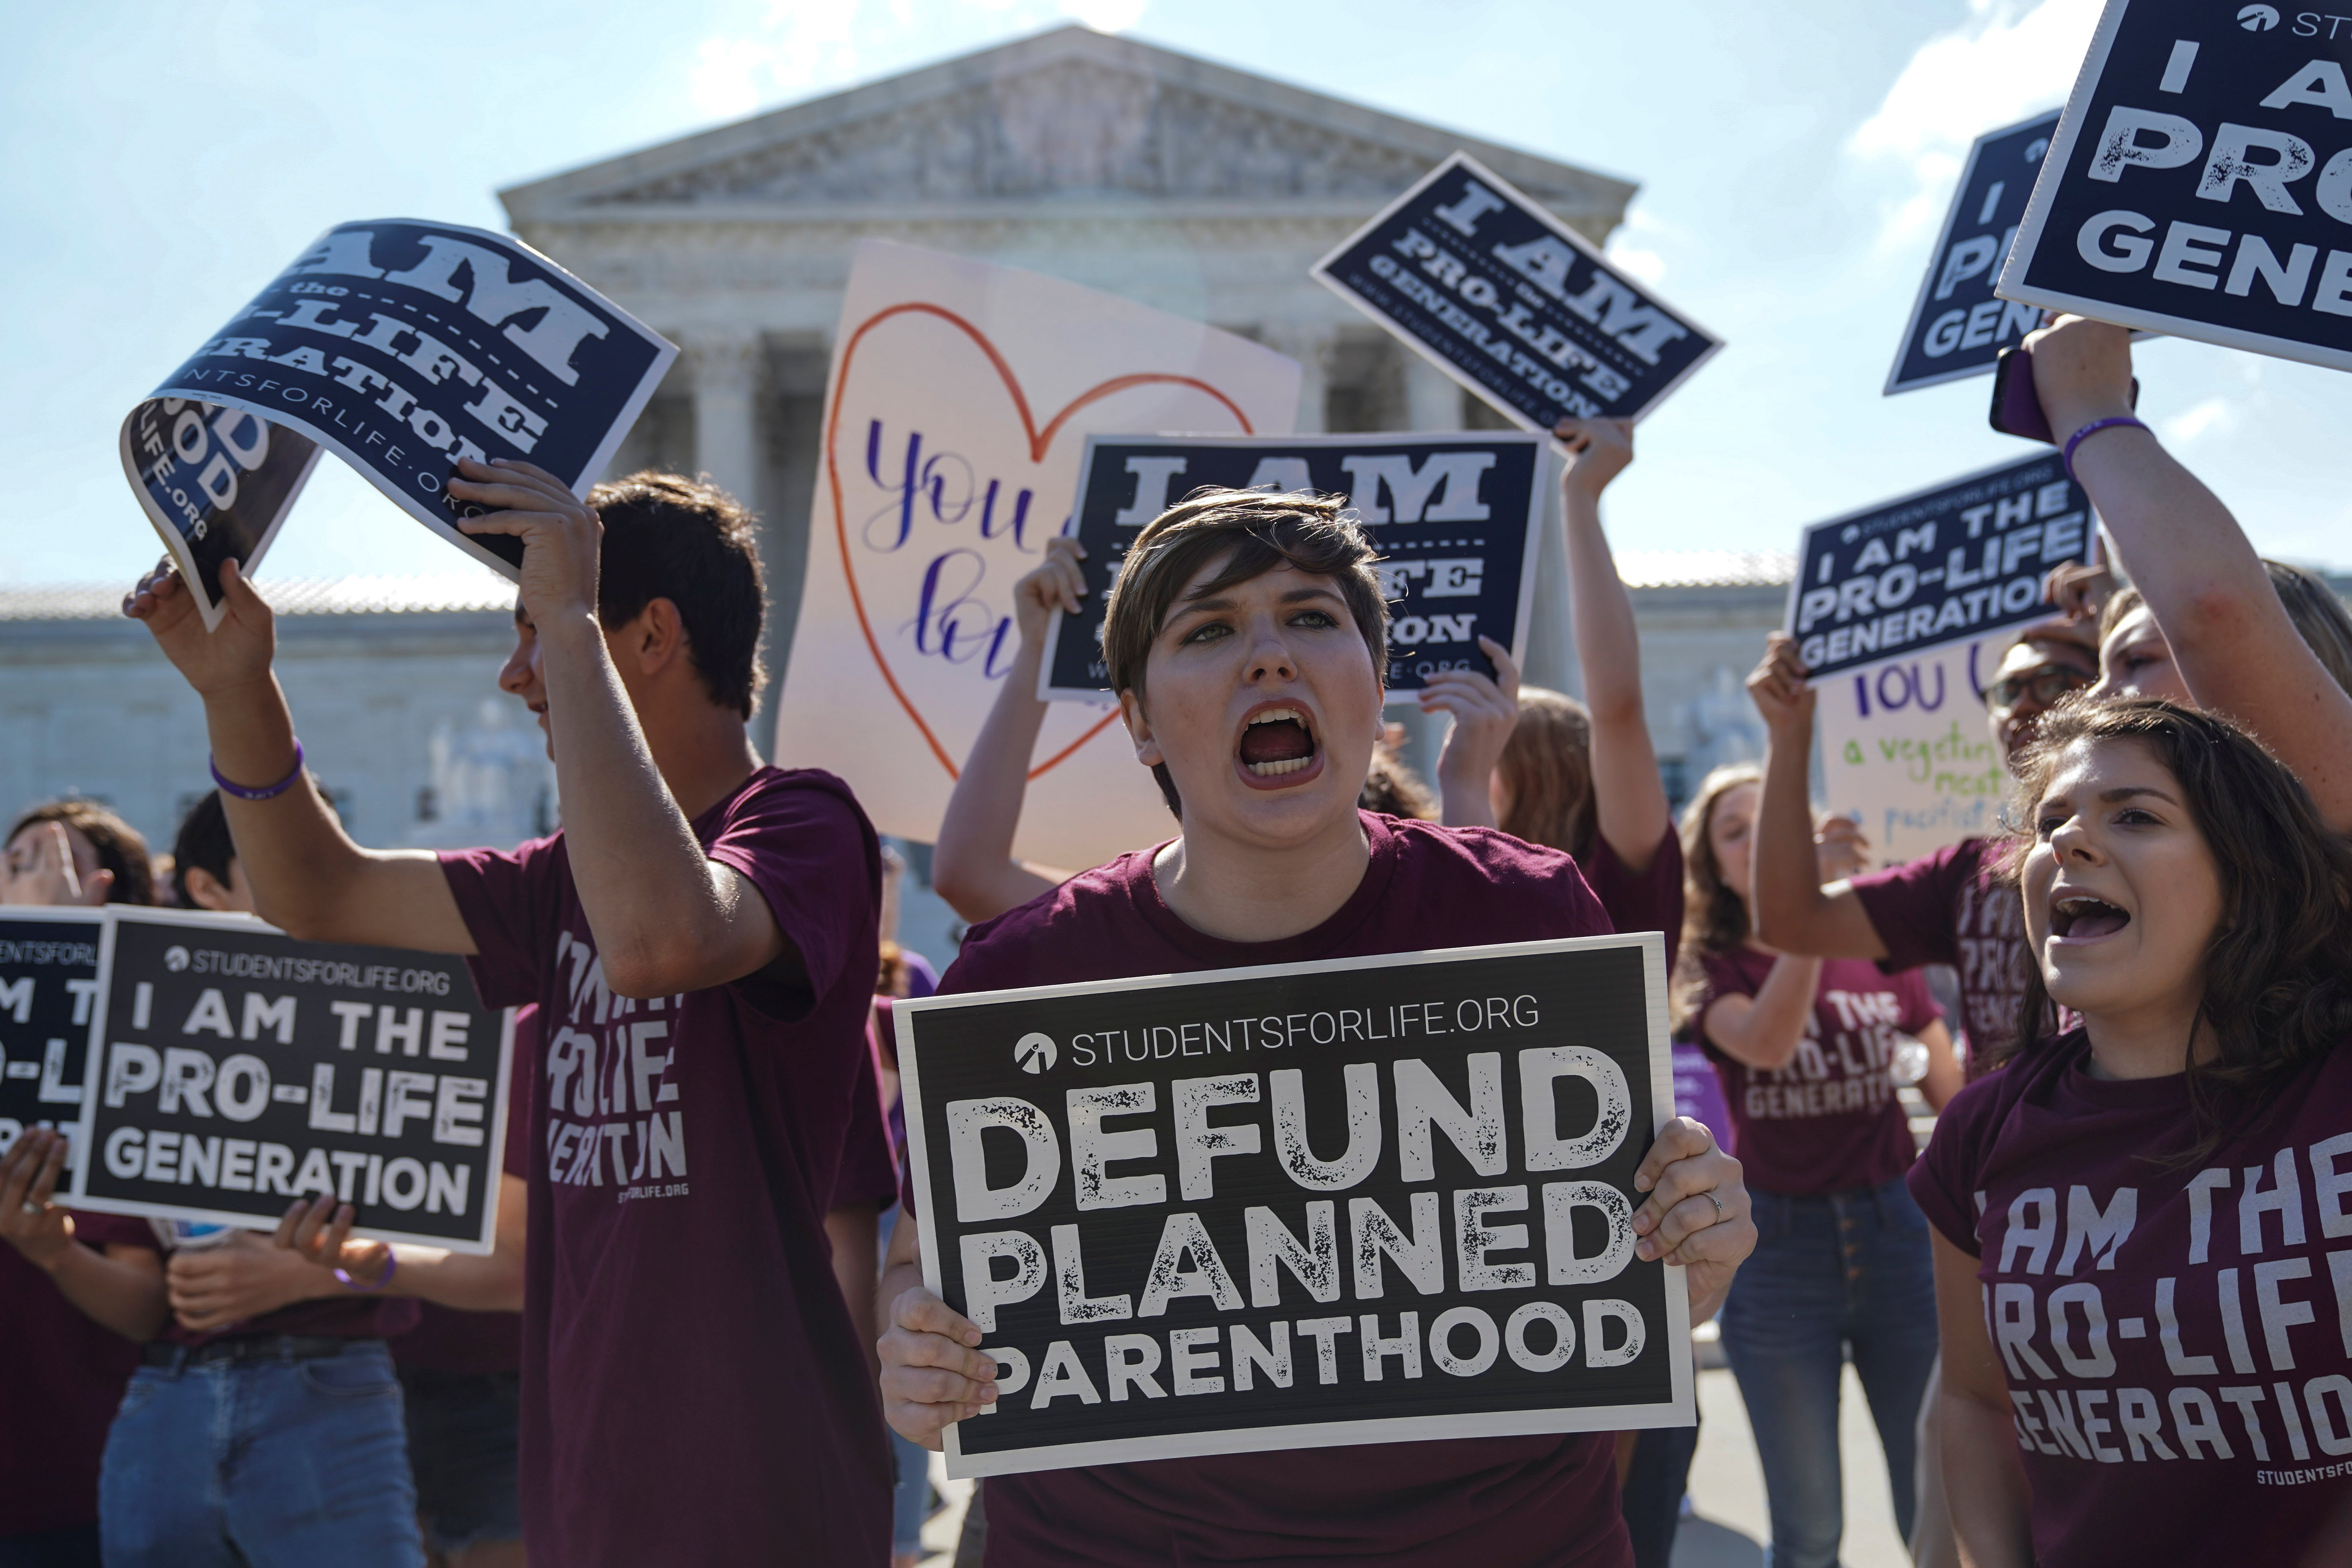 Pro-life and pro-choice protesters rally outside the U.S. Supreme Court waiting for the National Institute of Family and Life Advocates v. Becerra case, which remains pending, in Washington, U.S., June 25, 2018. REUTERS/Toya Sarno Jordan